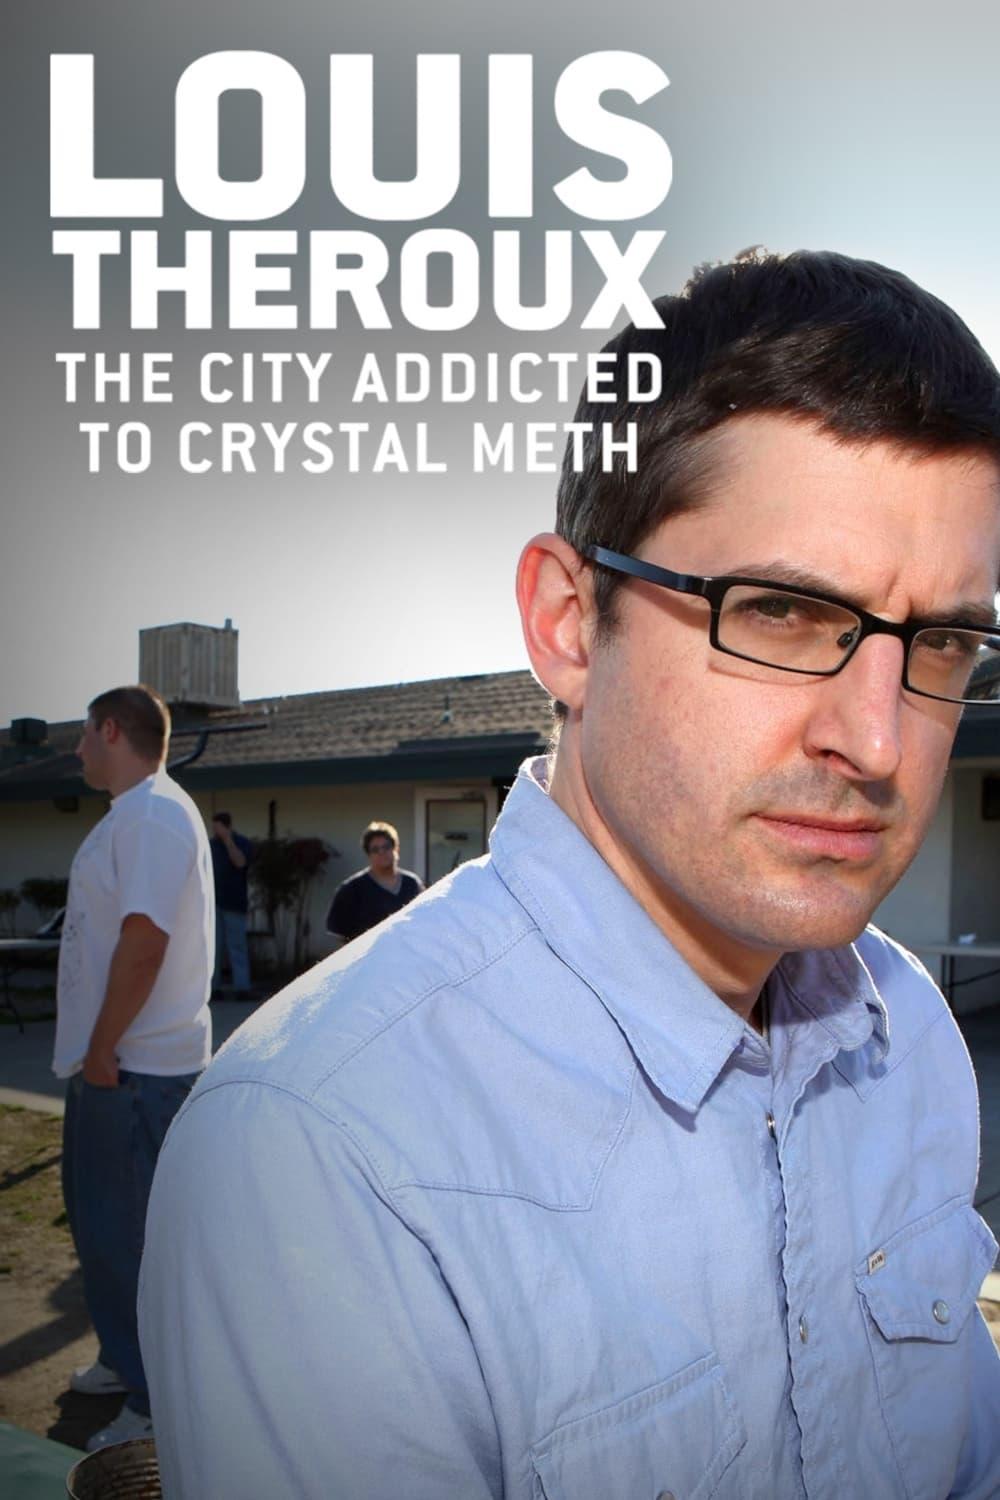 Louis Theroux: The City Addicted to Crystal Meth poster